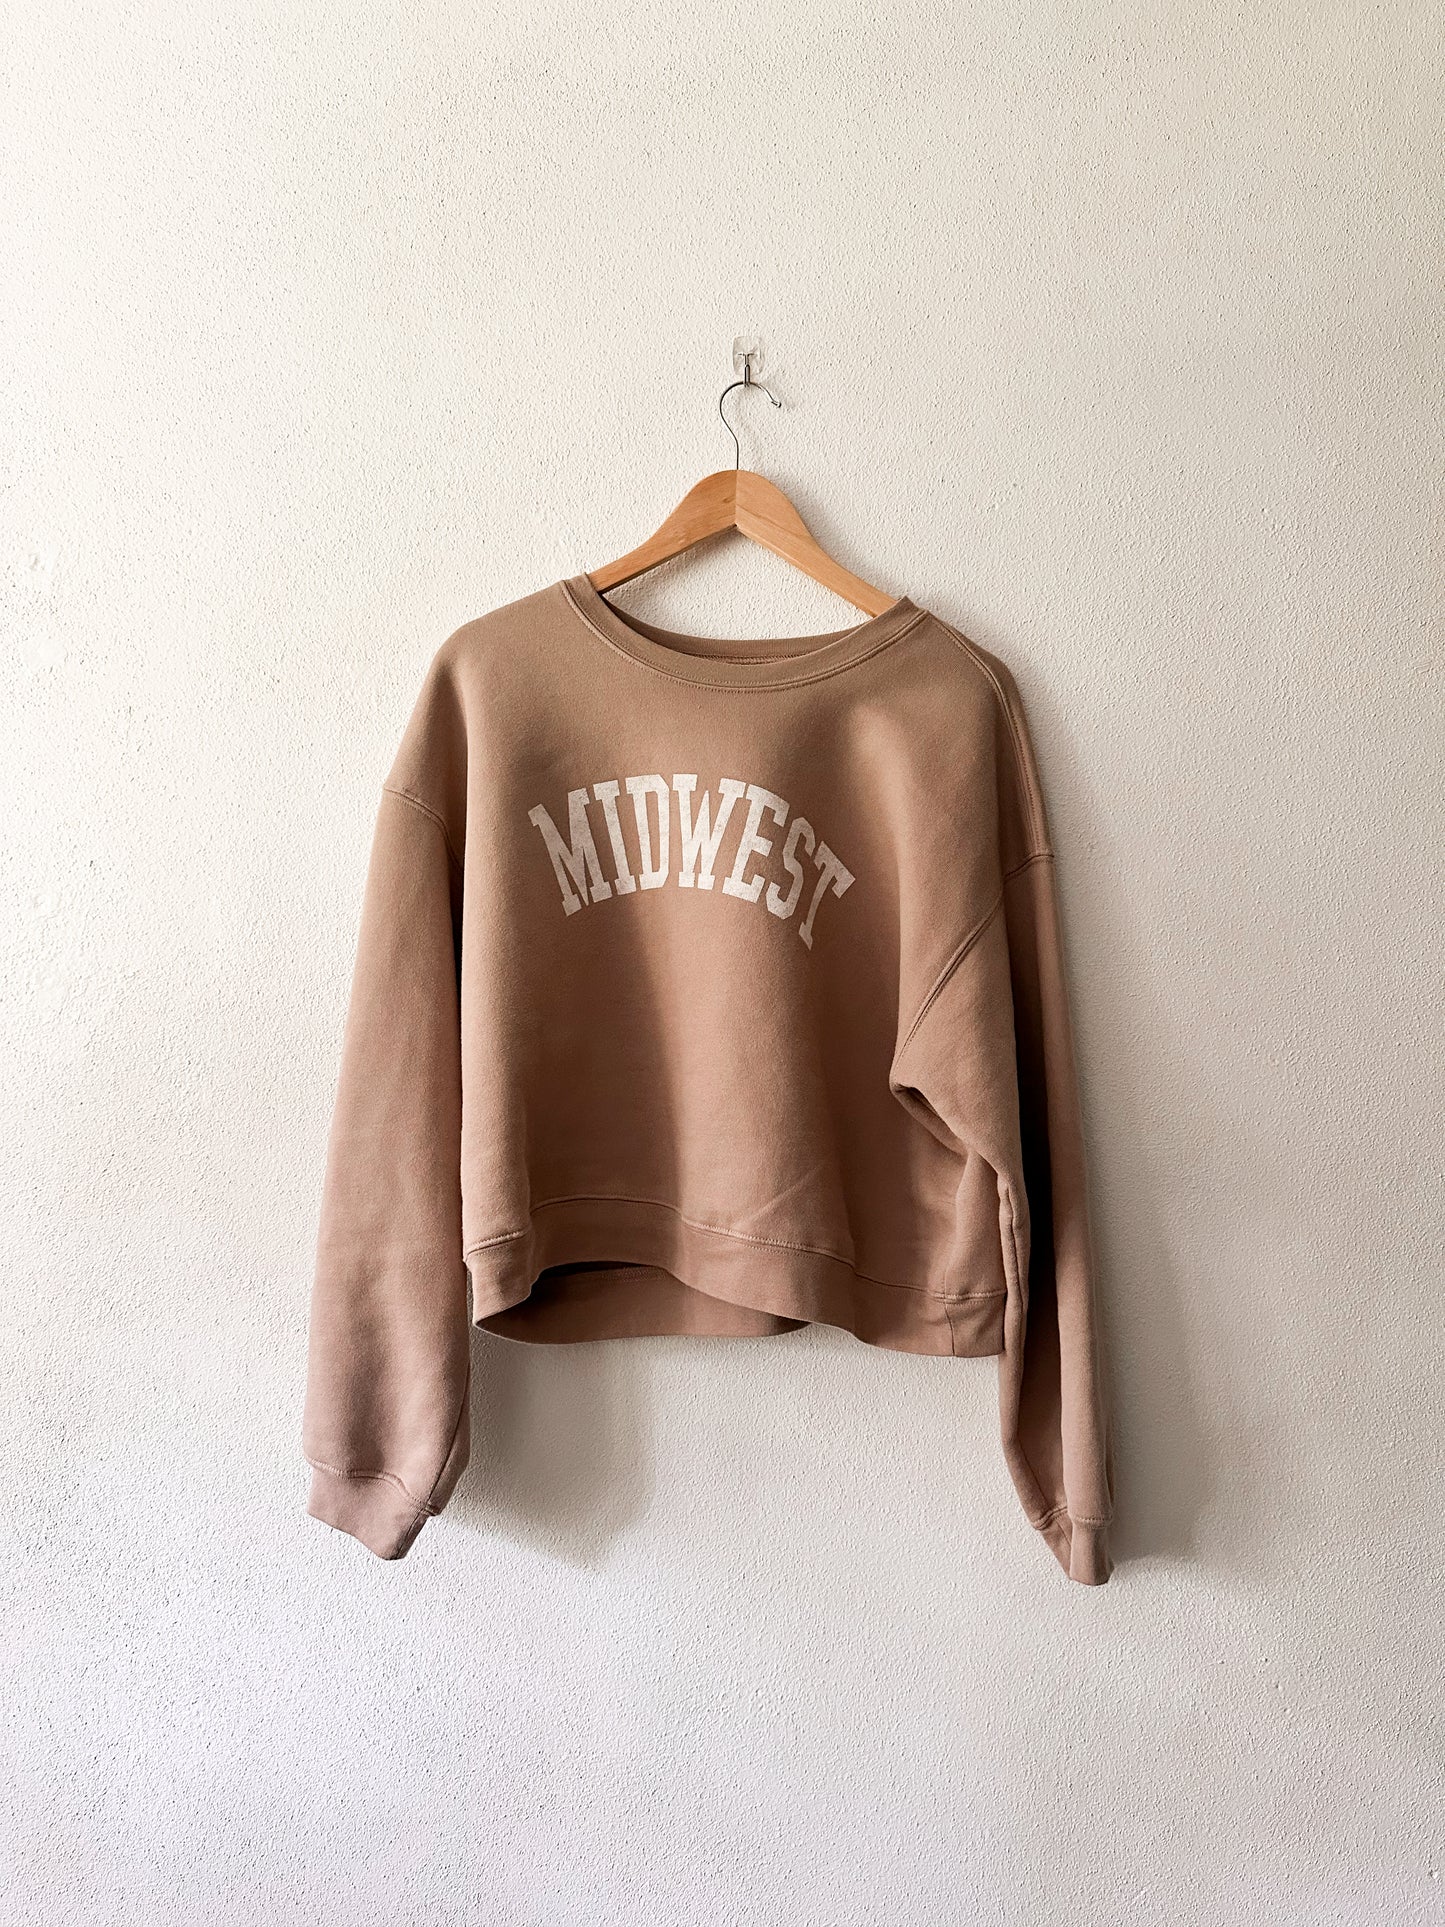 "MIDWEST" Mid-length Graphic Sweatshirt